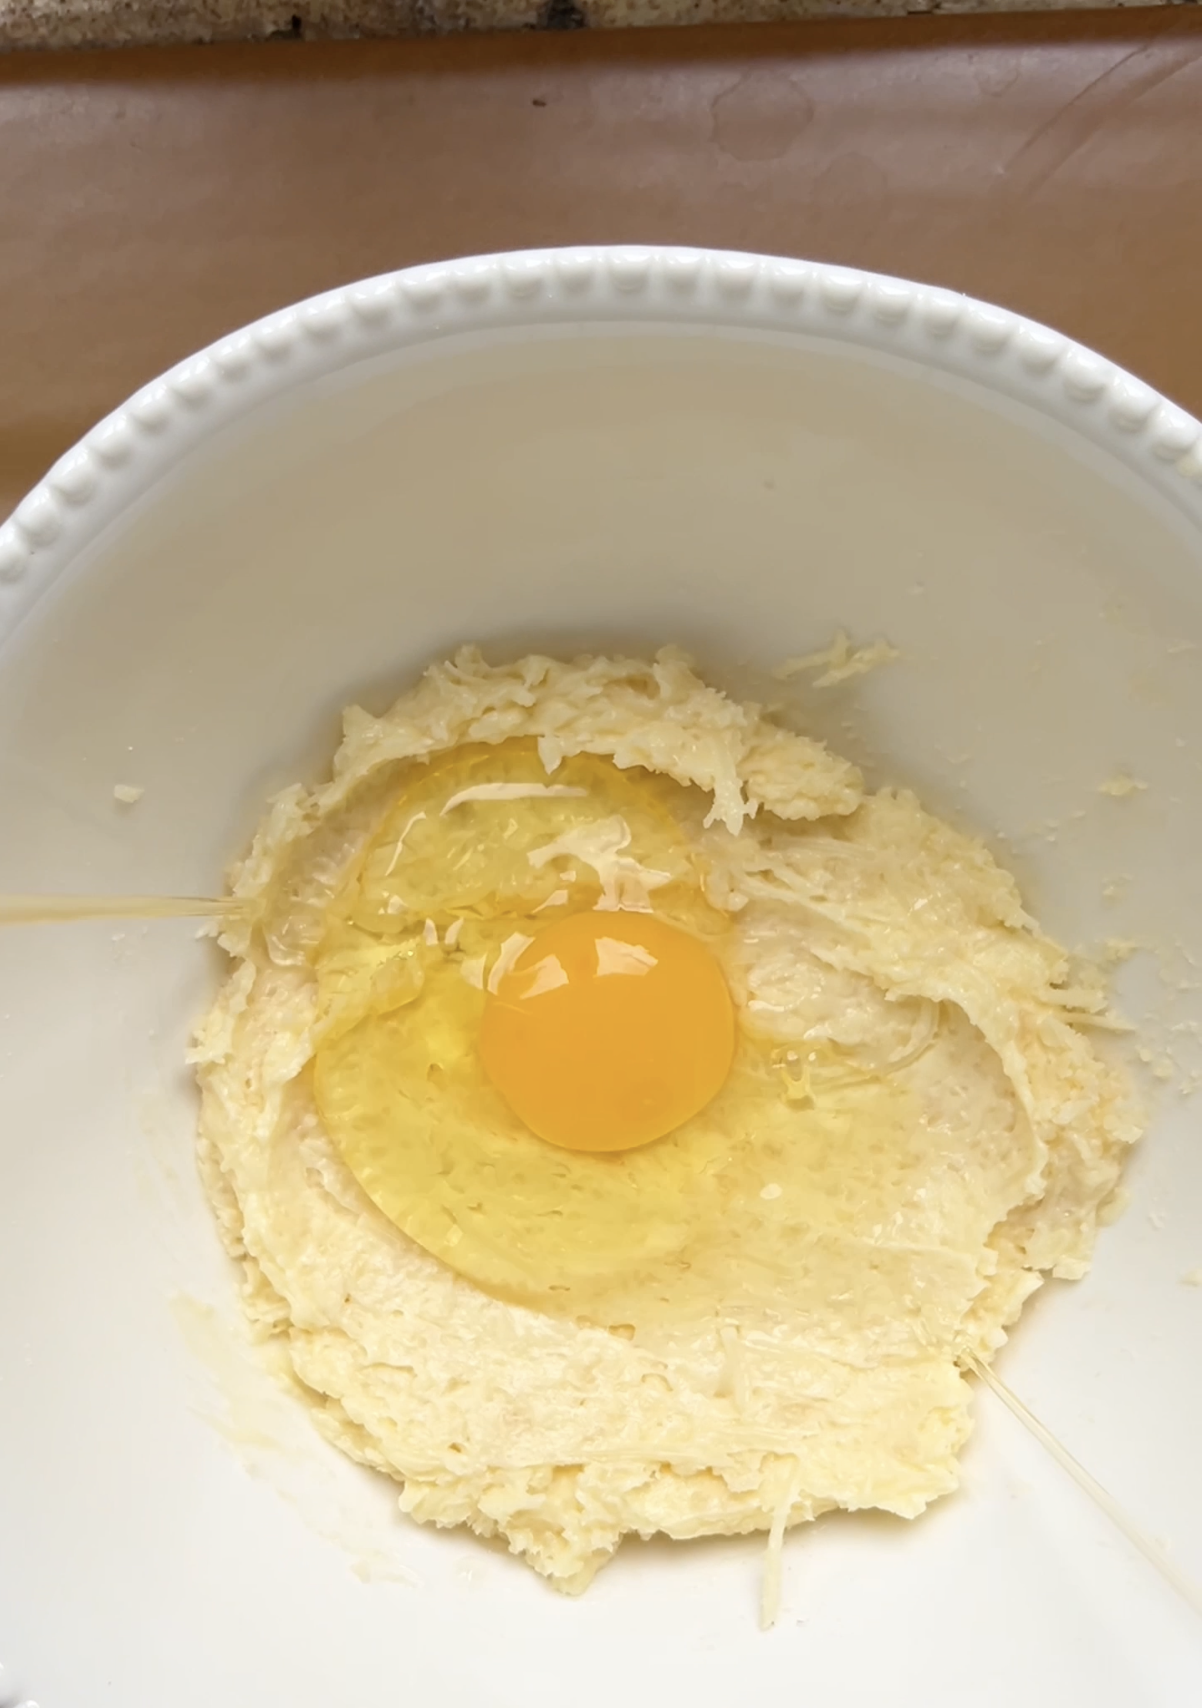 Egg added to the mixture of butter and grated cheeses.